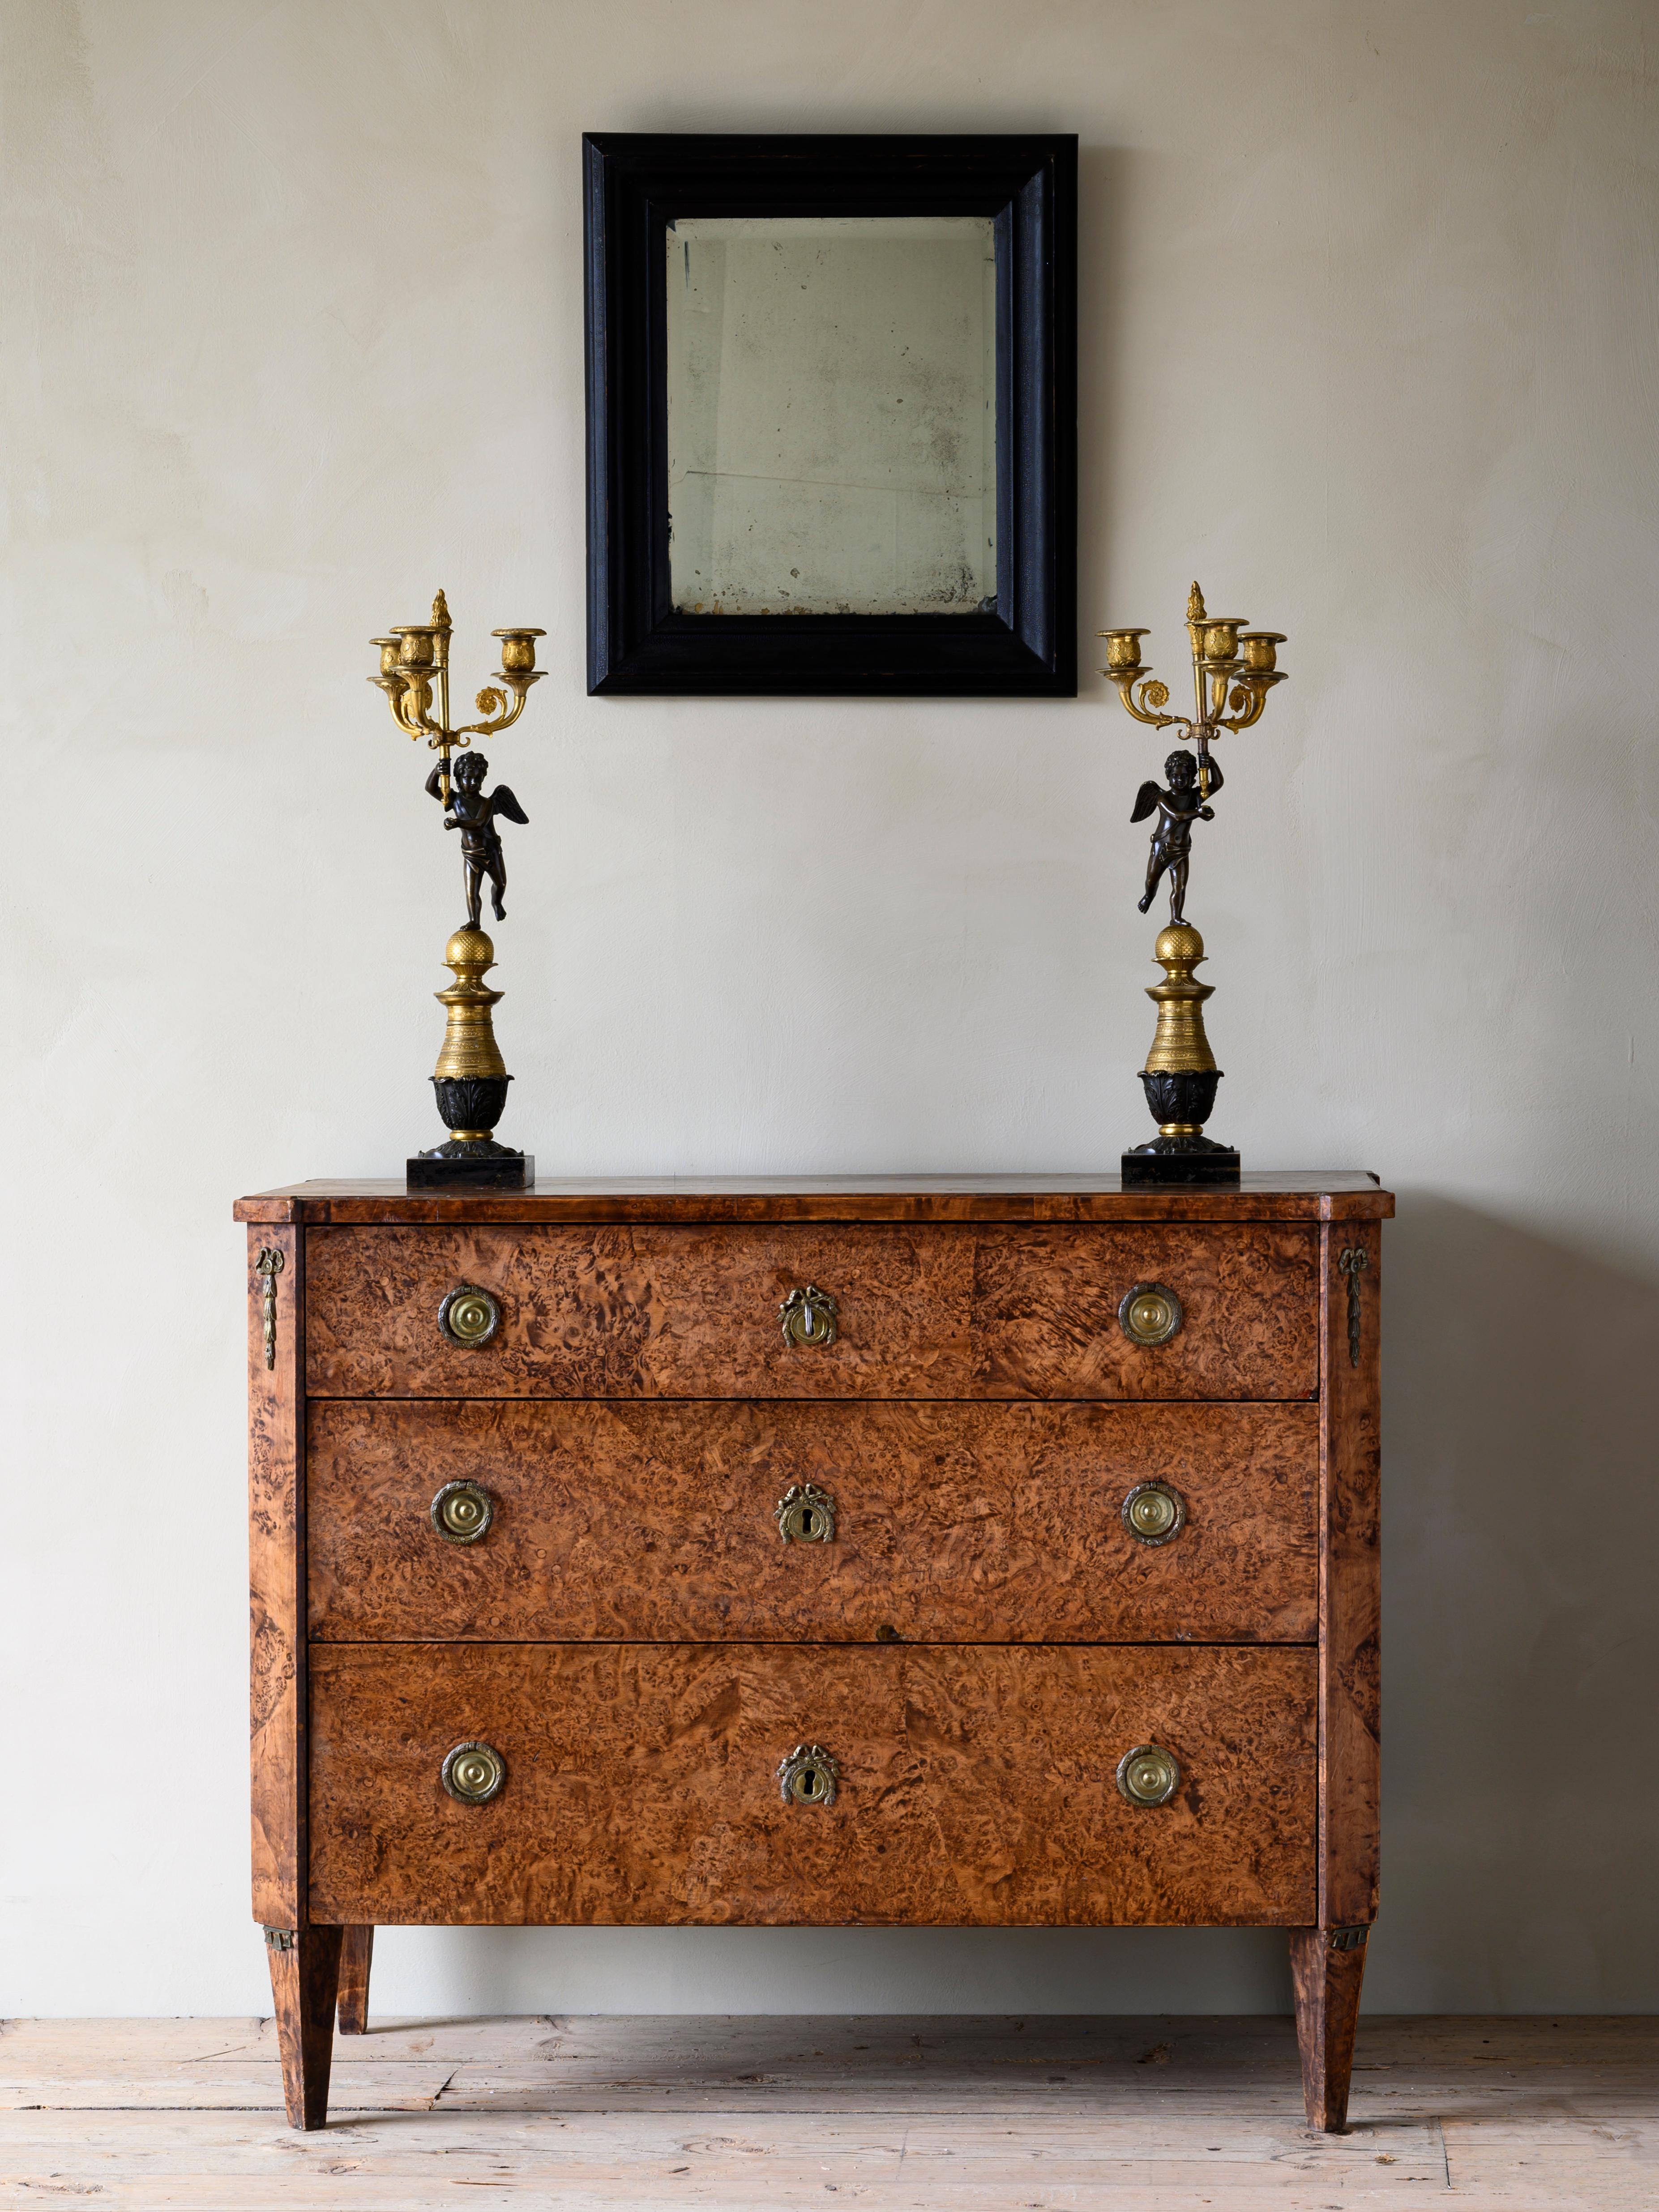 Fine 18th century Gustavian chest of drawers in alder root veneer in its original condition with good subtle patination, circa 1800.

Good condition with wear consistent with age and use. Structurally good and sturdy. A detailed condition report